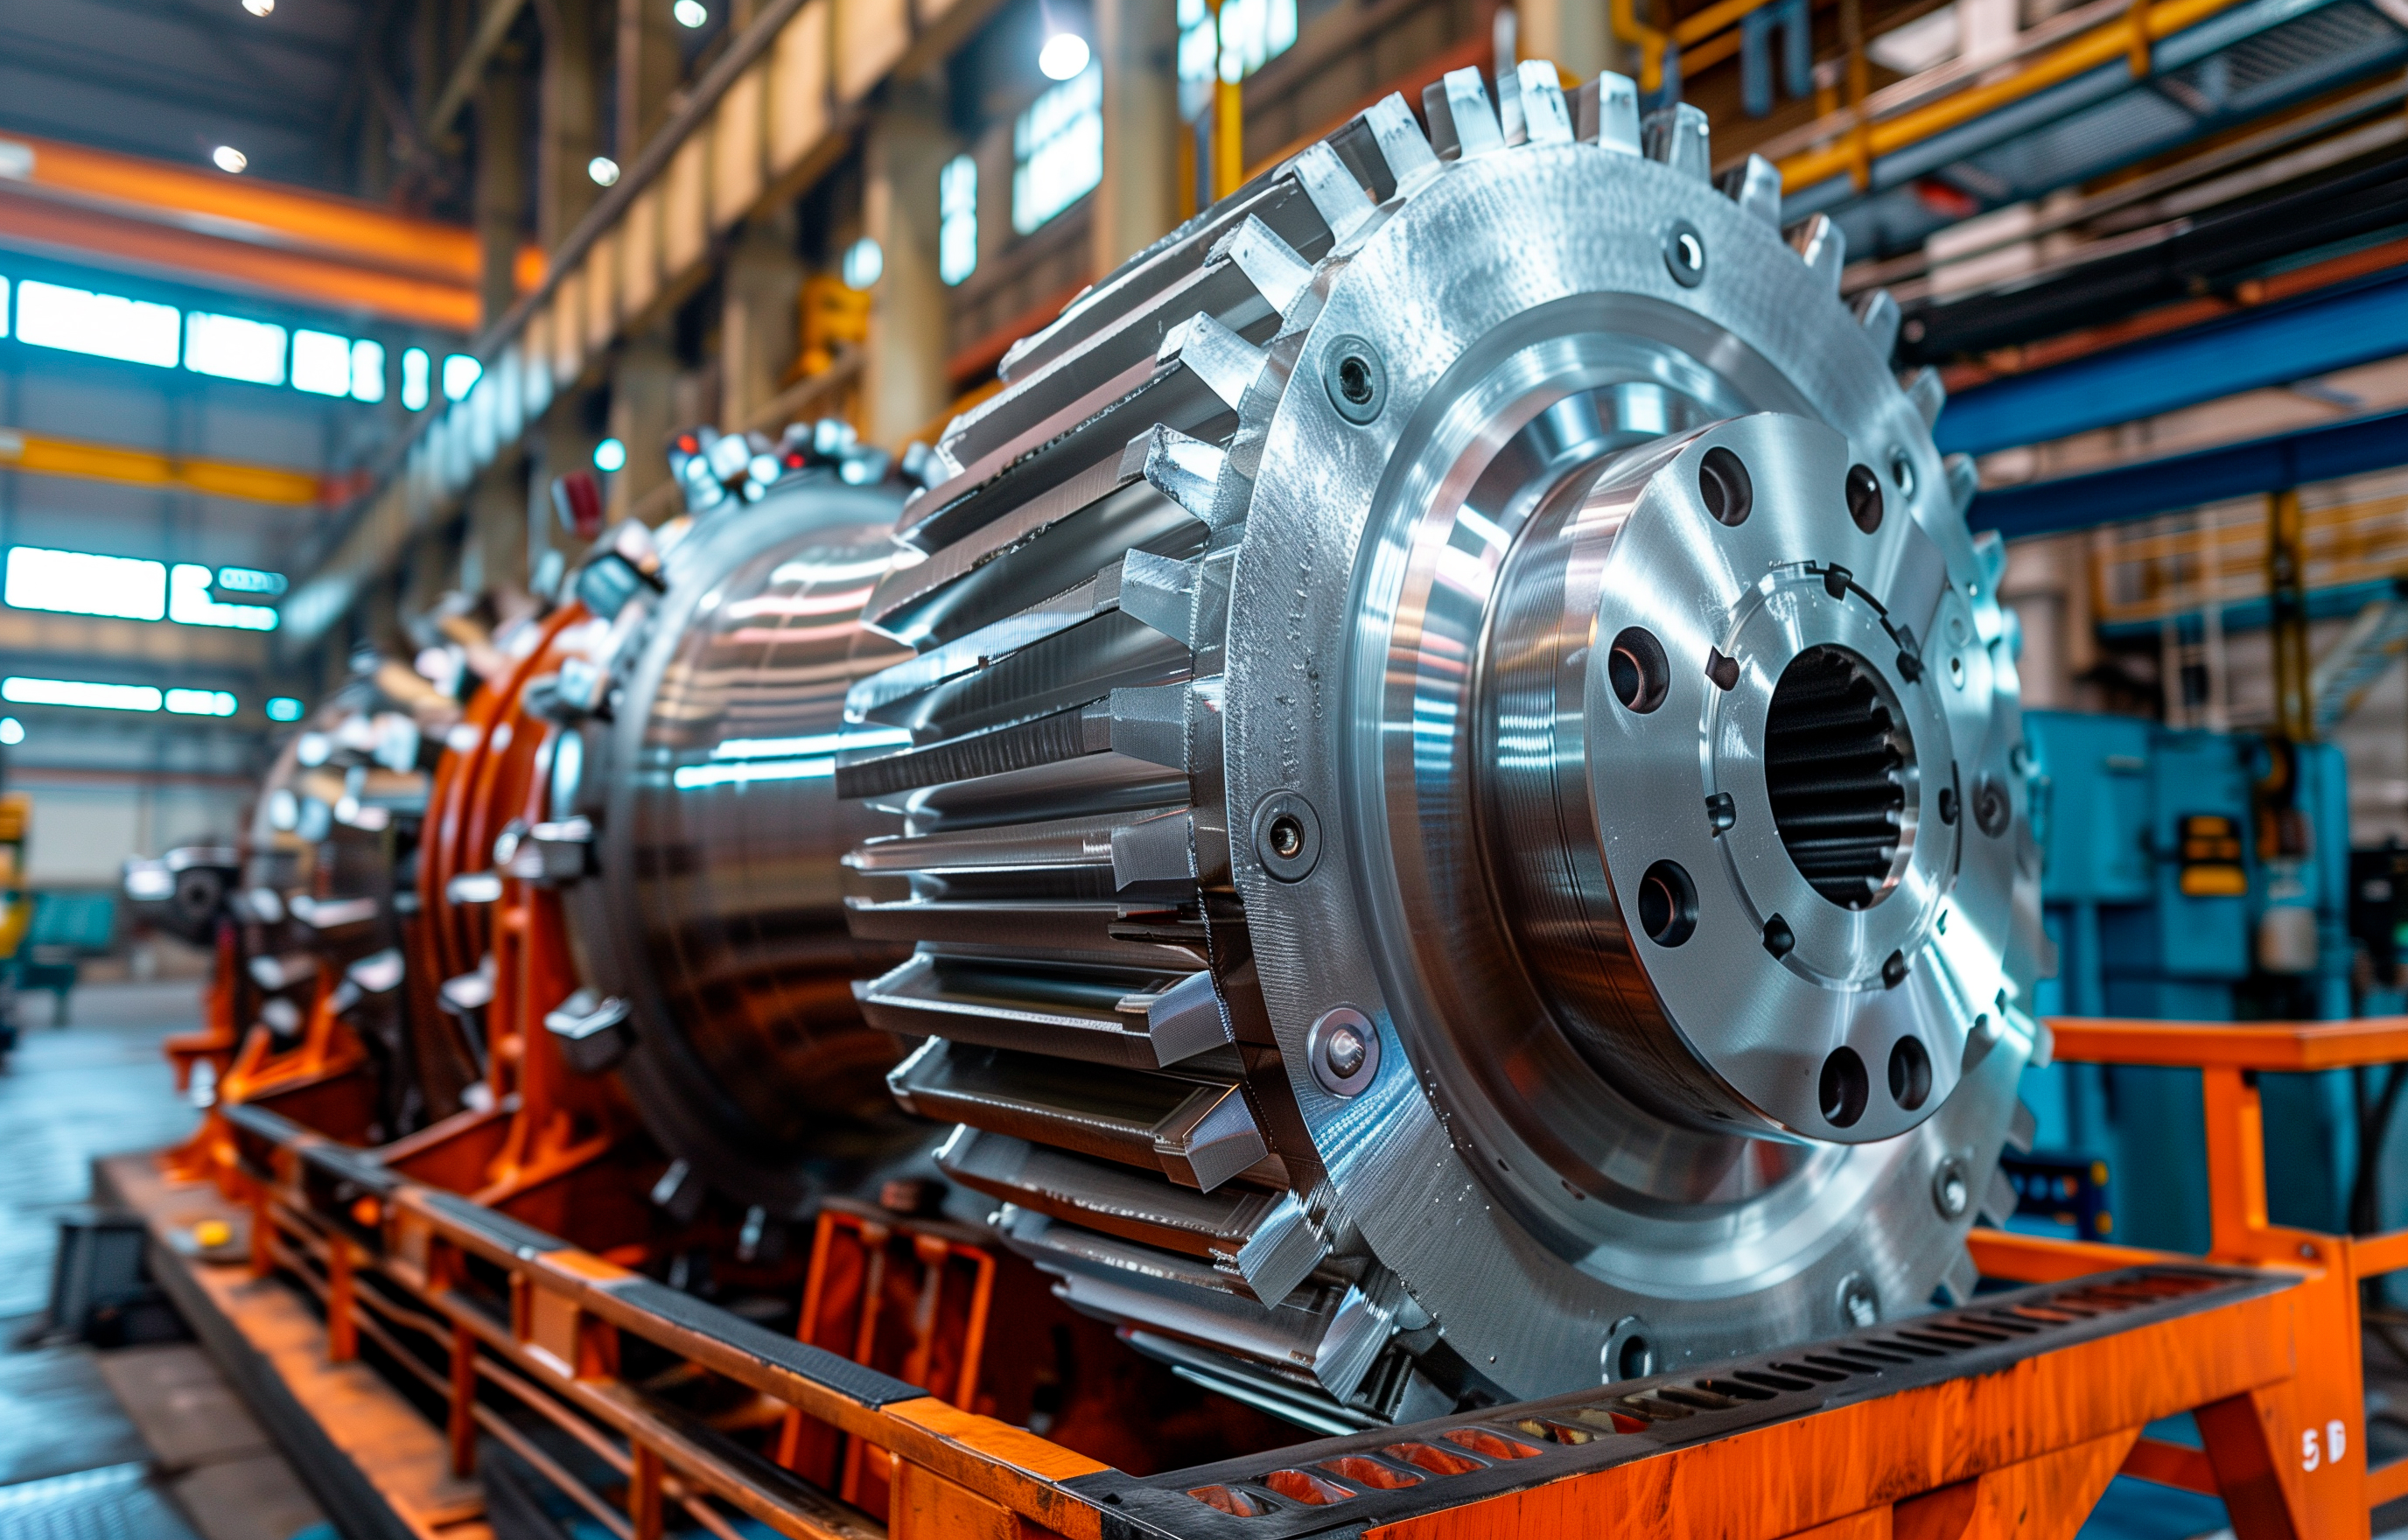 The picture shows a production plant with several large gearwheels lying on a red metal structure.